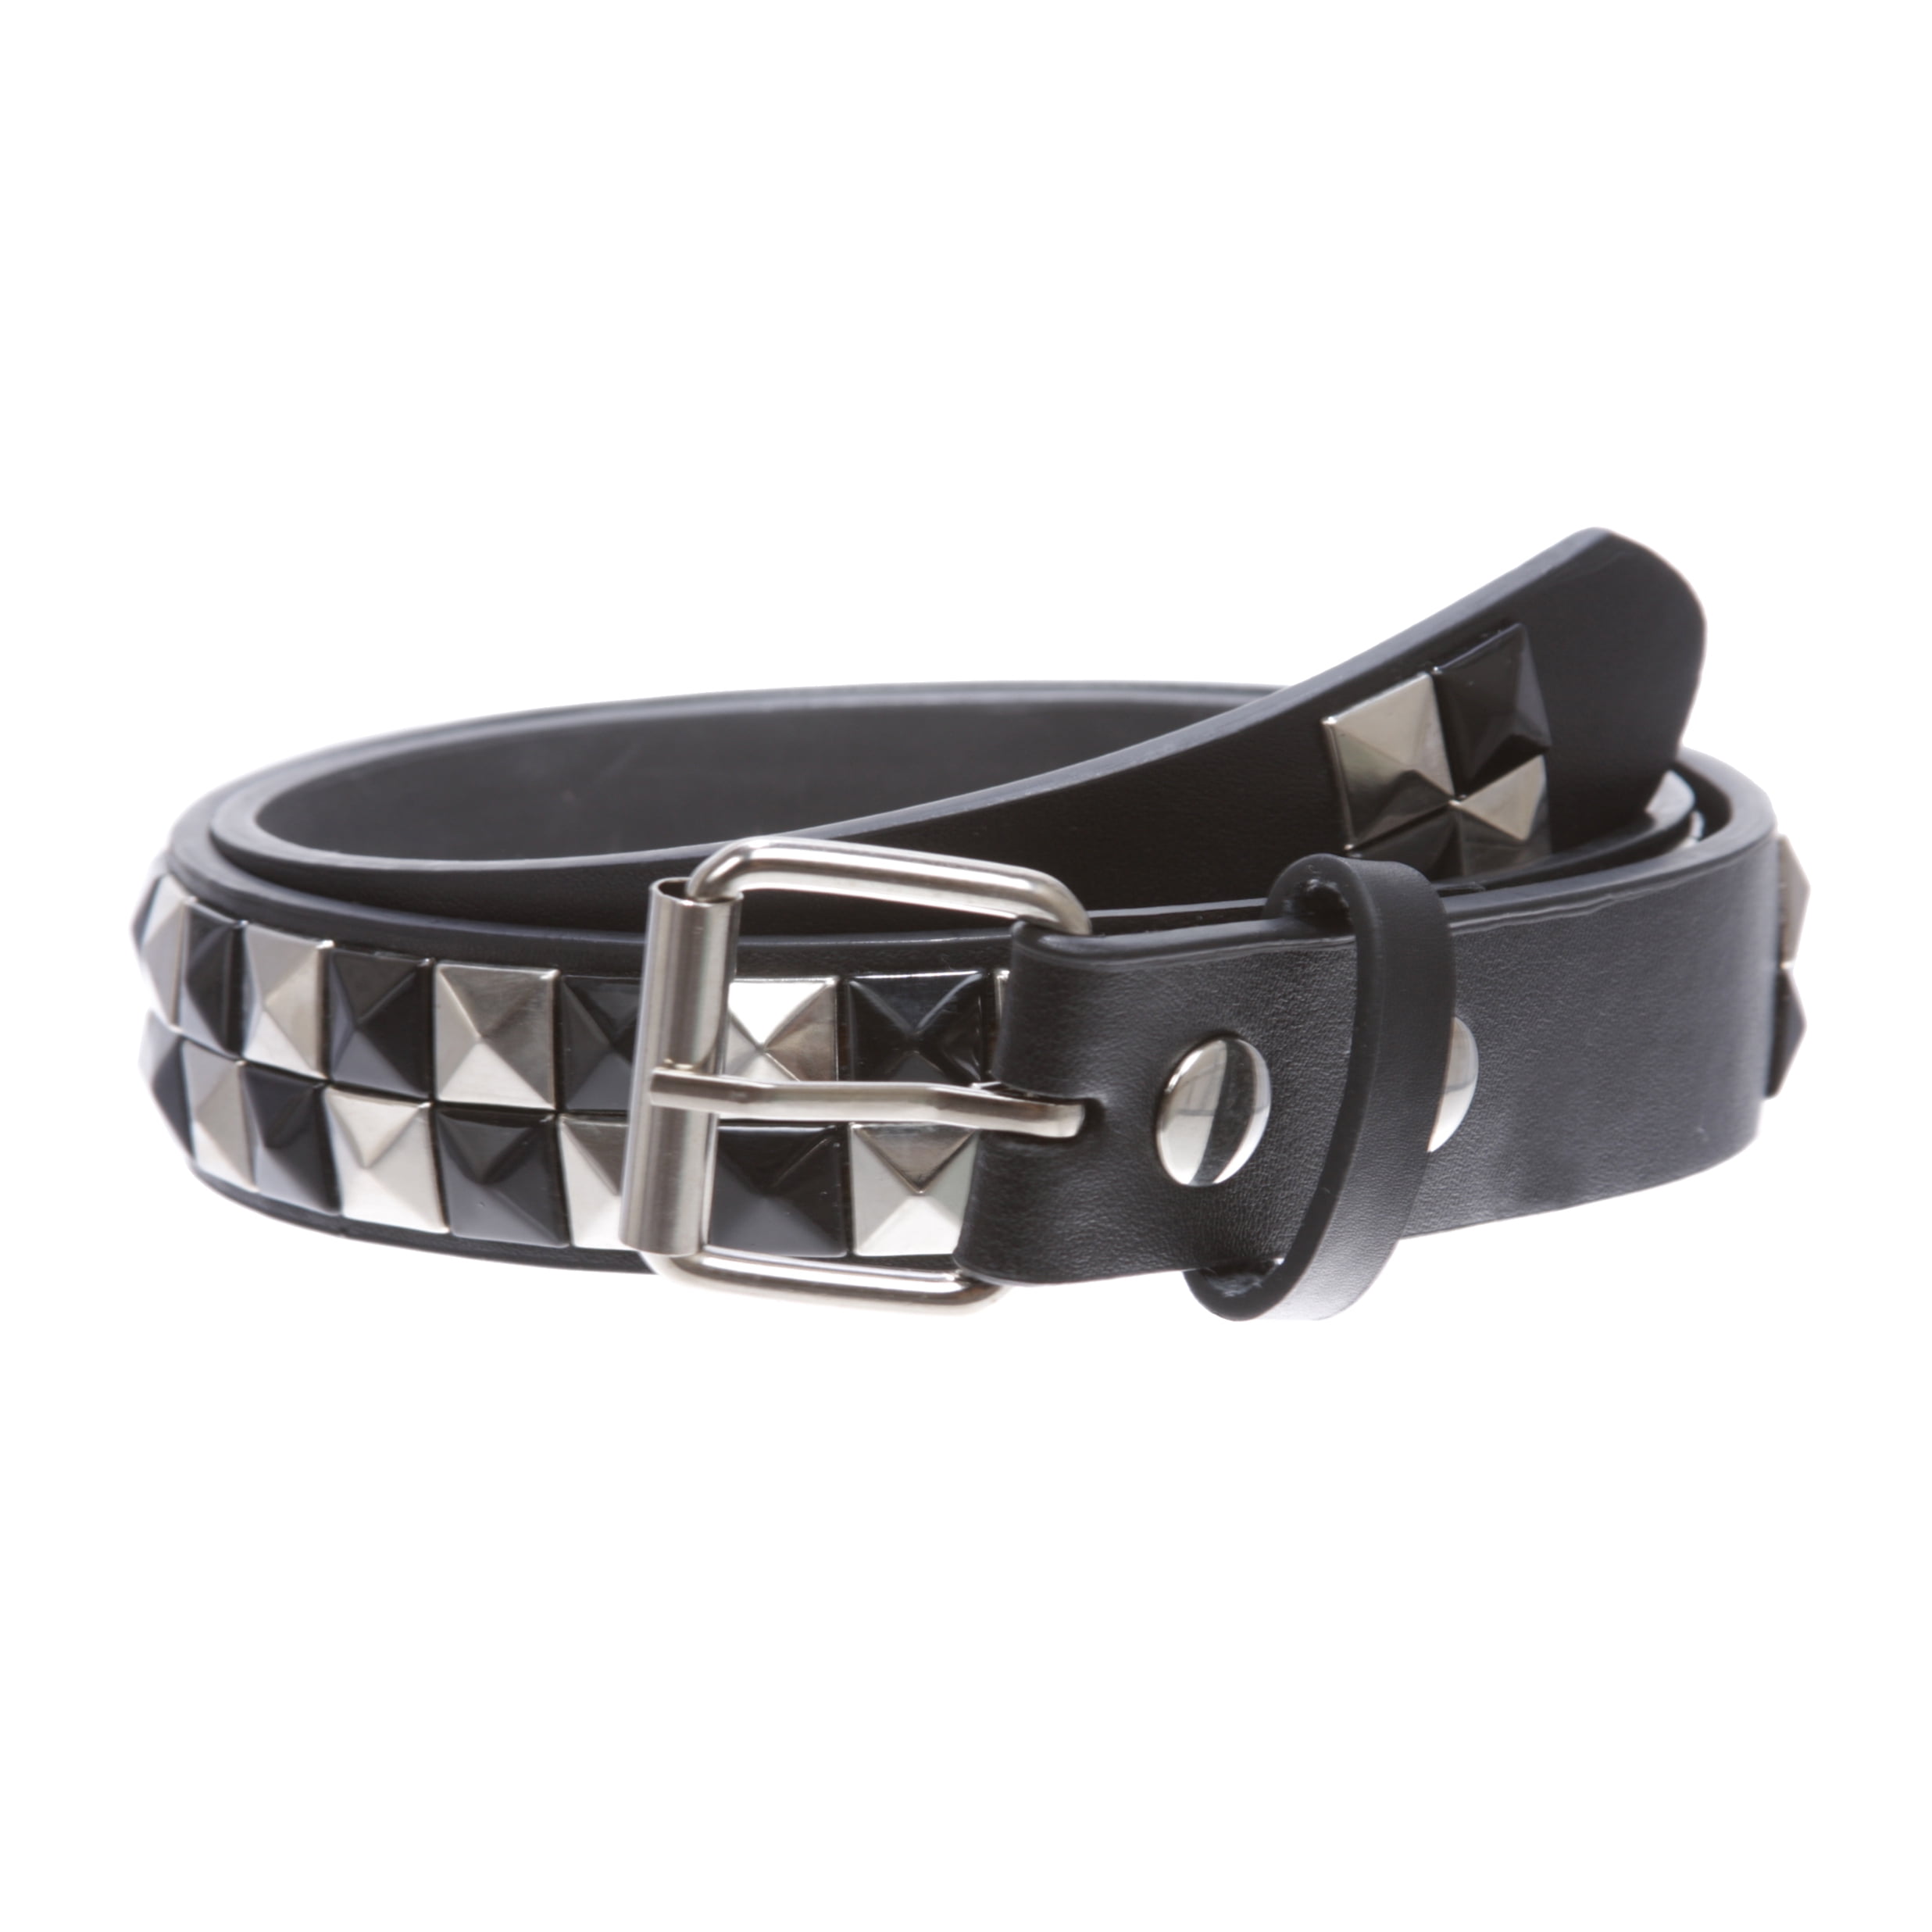 Black & White Checkerboard Pyramid Studded Leather Belt